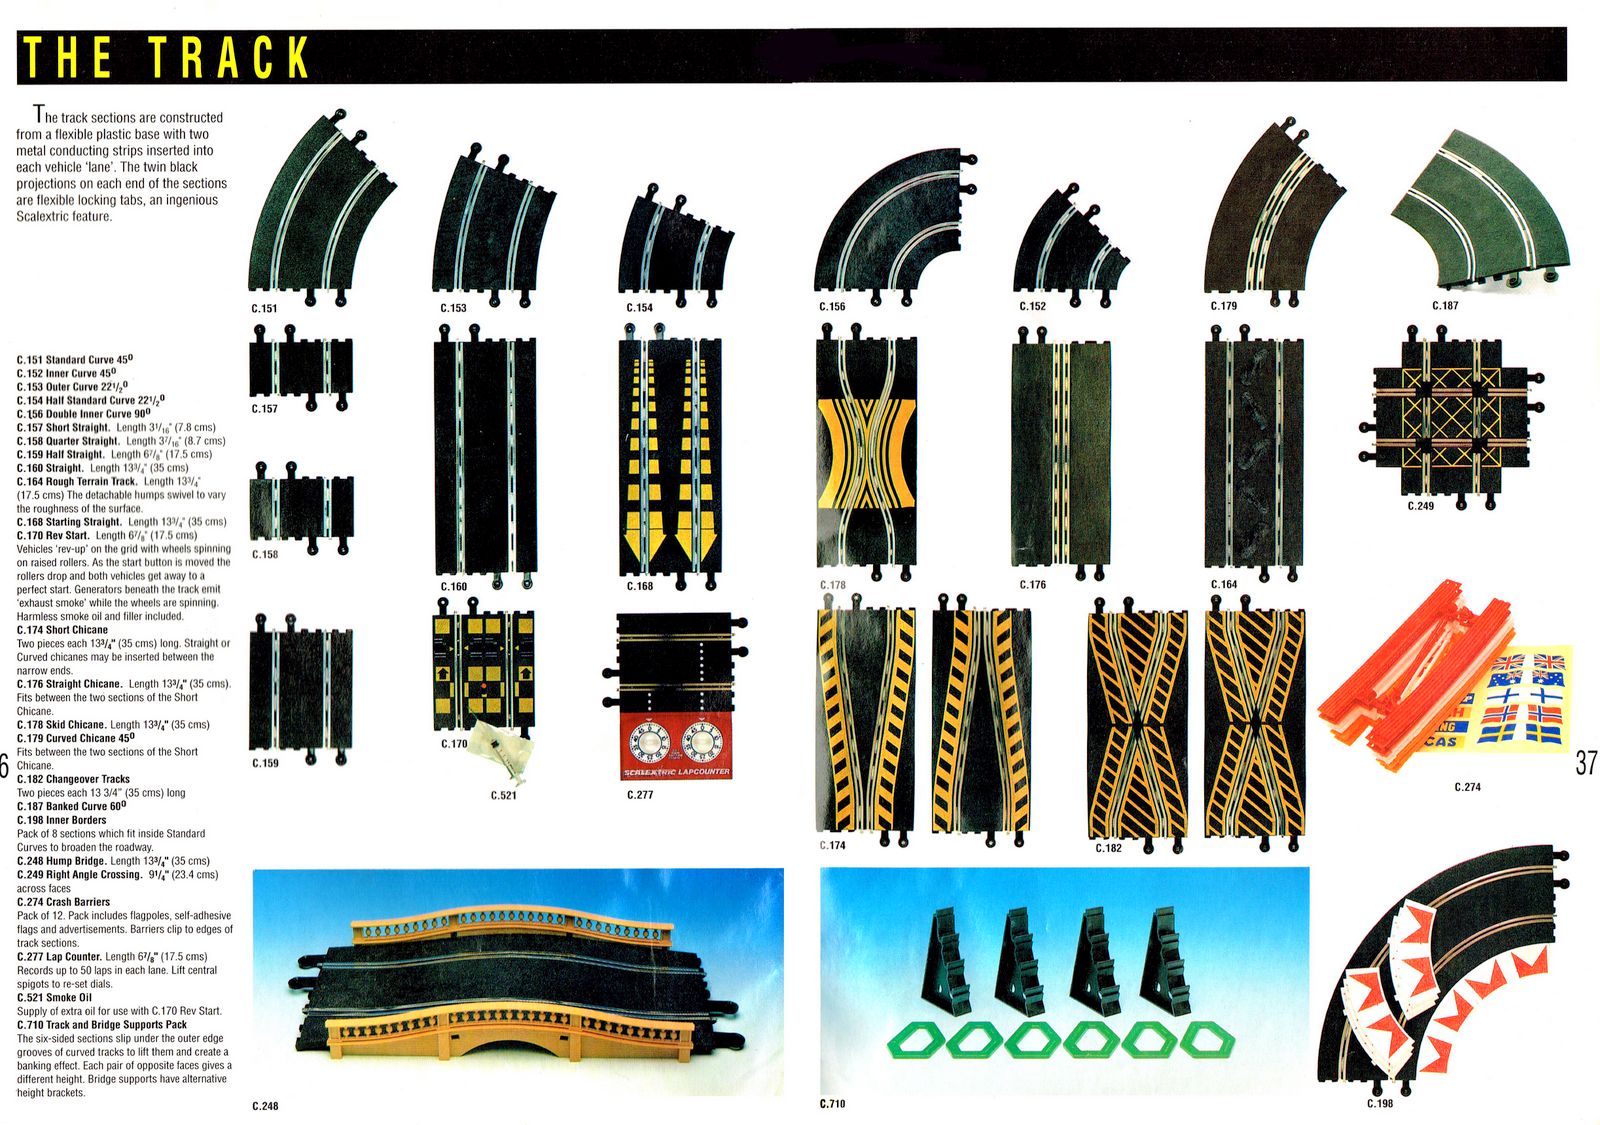 file-the-track-scalextric-scalextric31-1990-jpg-the-brighton-toy-and-model-index